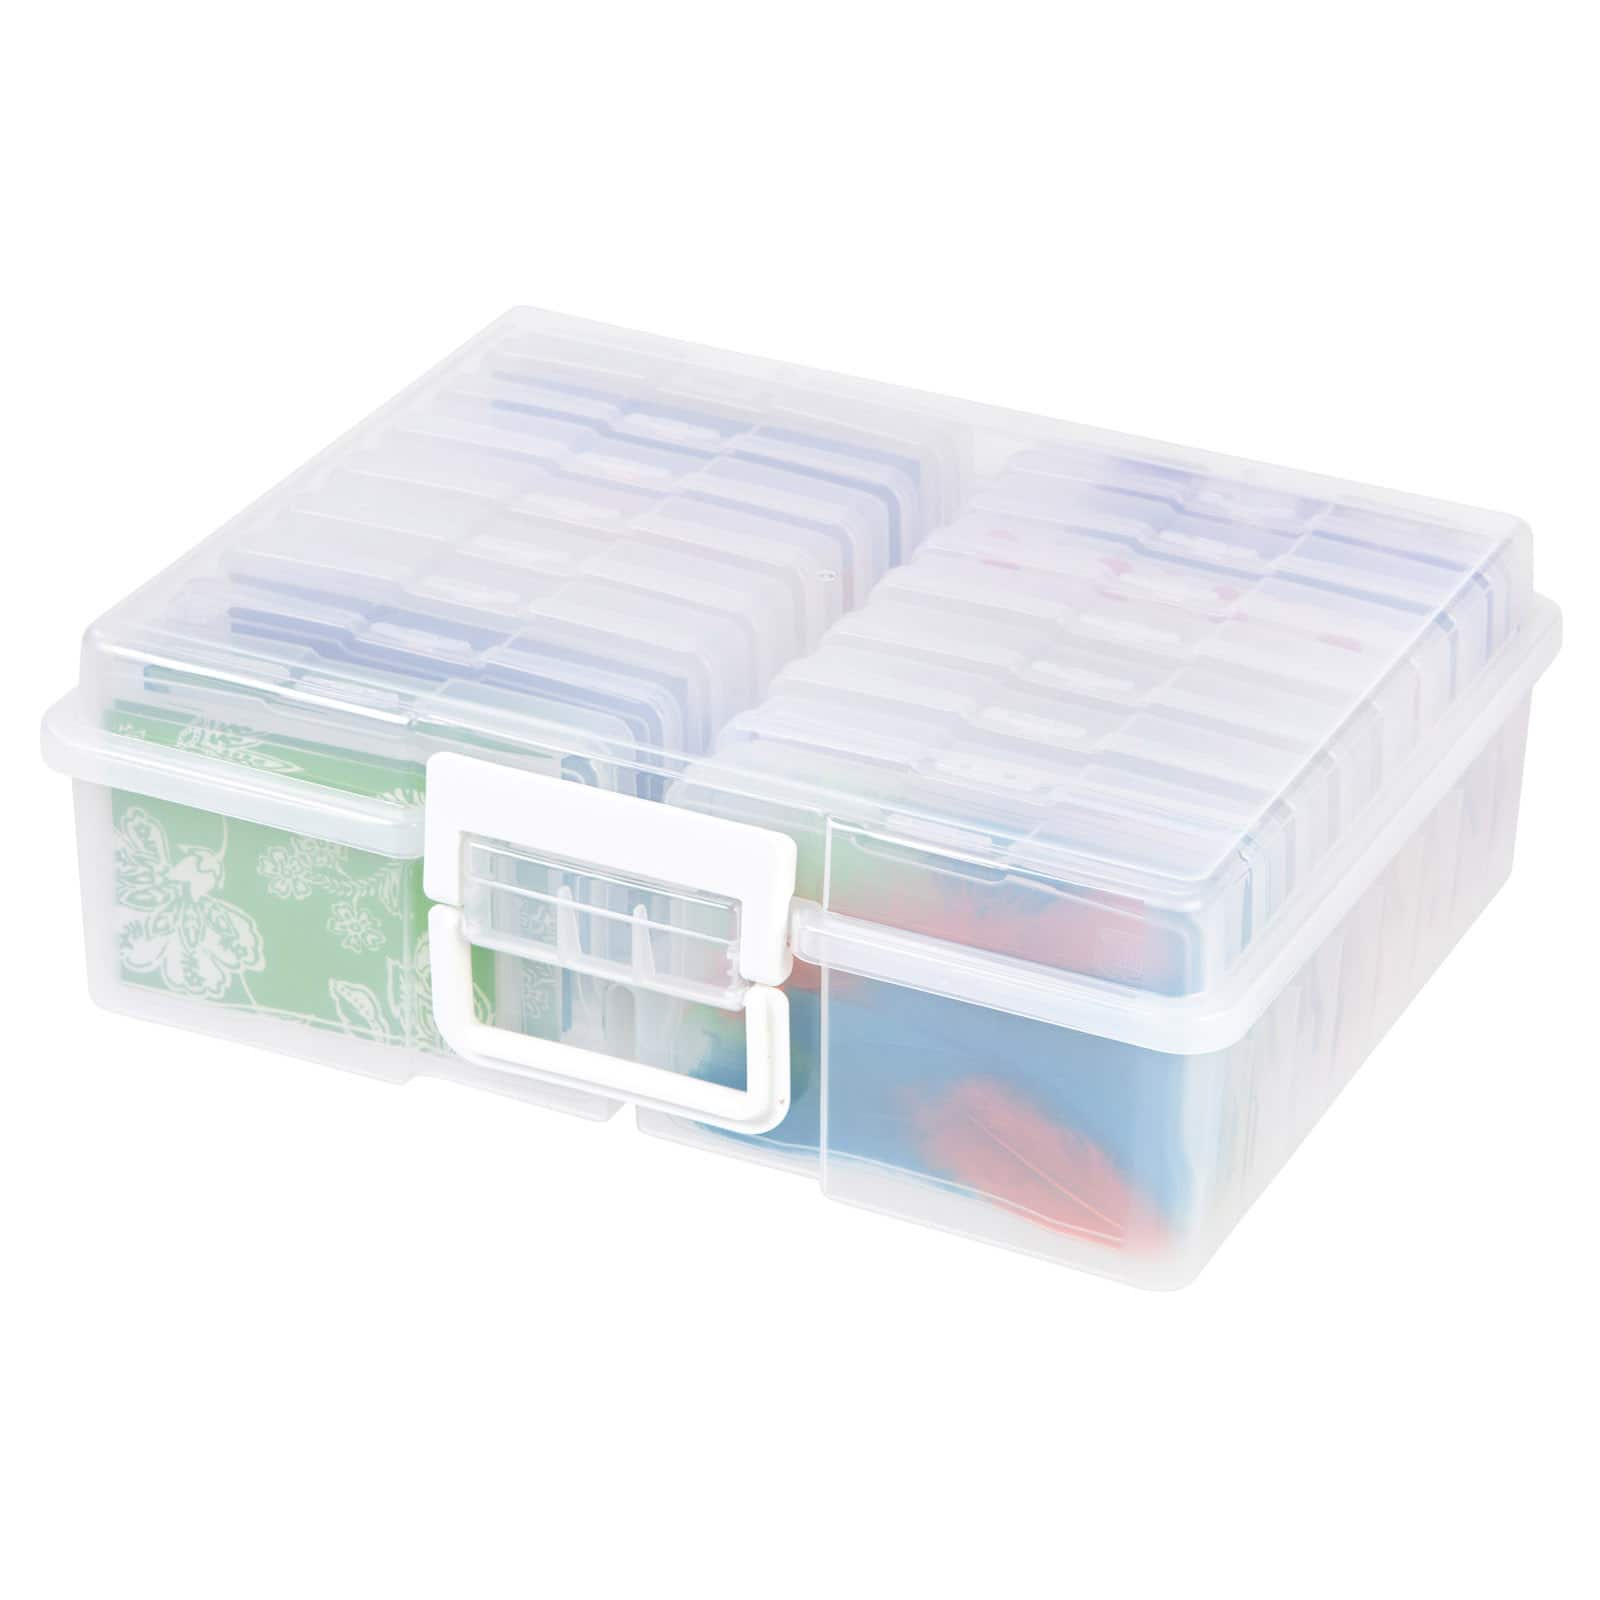 Plastic Organizer Box Photo Stickers Stamps Seeds Photo Storage Box Pictures Craft Storage Box Extra Large Photo Case with 18 Inner Photo Keeper 4 x 6 Clear Photo Boxes Storage with Lid 